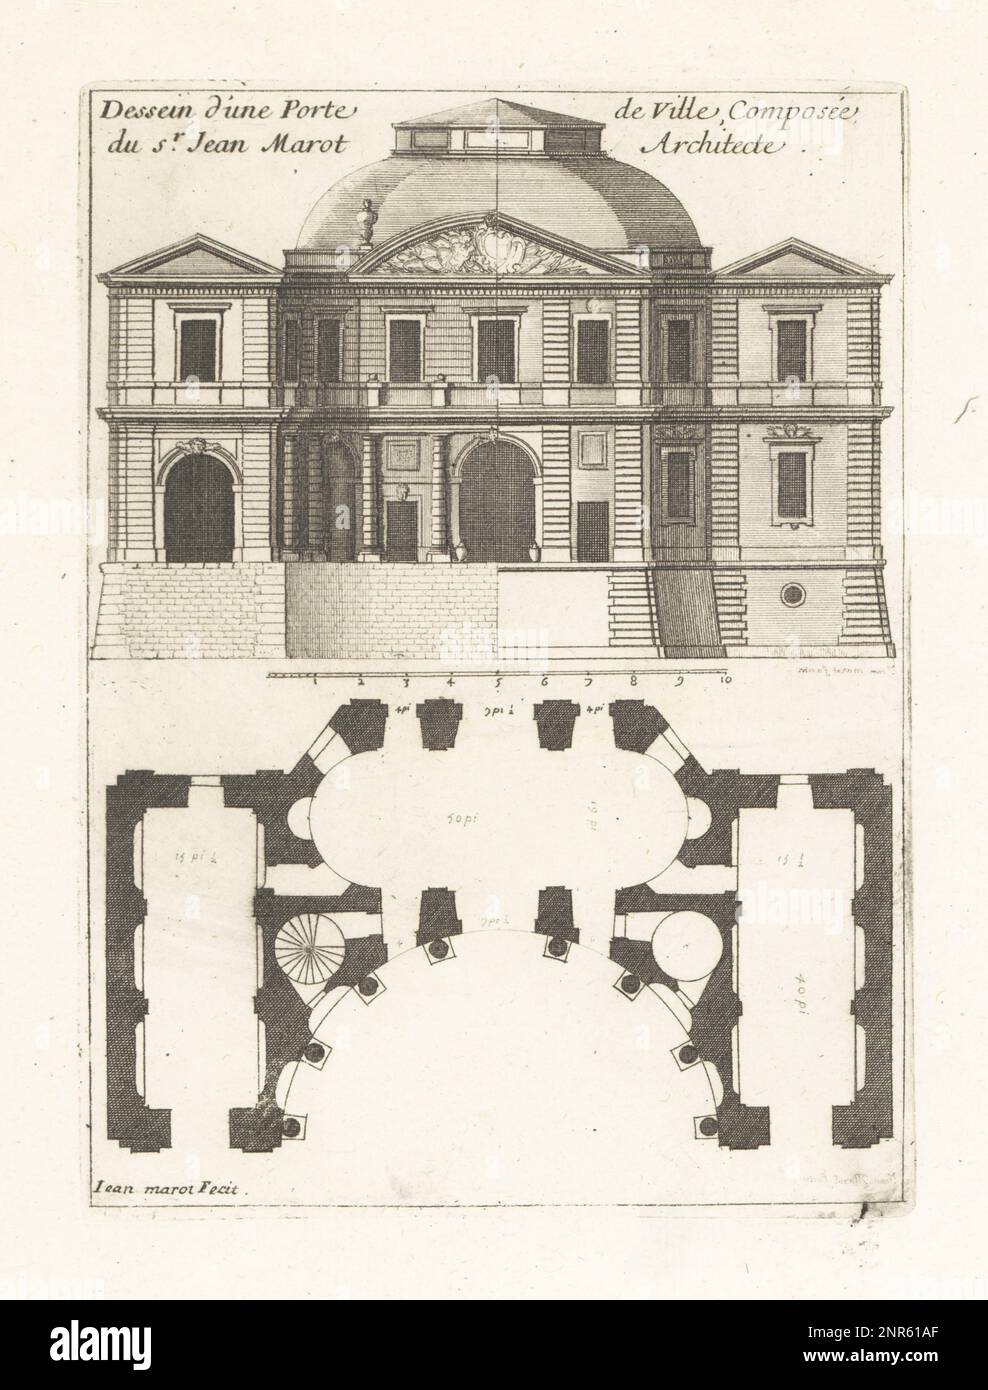 Elevation and plan for a town gate by architect Jean Marot. Dessein d'une Porte de Ville, composee du Sr. Jean Marot Architect. Copperplate engraving drawn and engraved by Jean Marot from his Recueil des Plans, Profils et Elevations de Plusieurs Palais, Chasteaux, Eglises, Sepultures, Grotes et Hotels, Collection of Plans, Profiles and Elevations of Palaces, Castles, Churches, Tombs, Grottos and Hotels, chez Mariette, Paris, 1655. Stock Photo